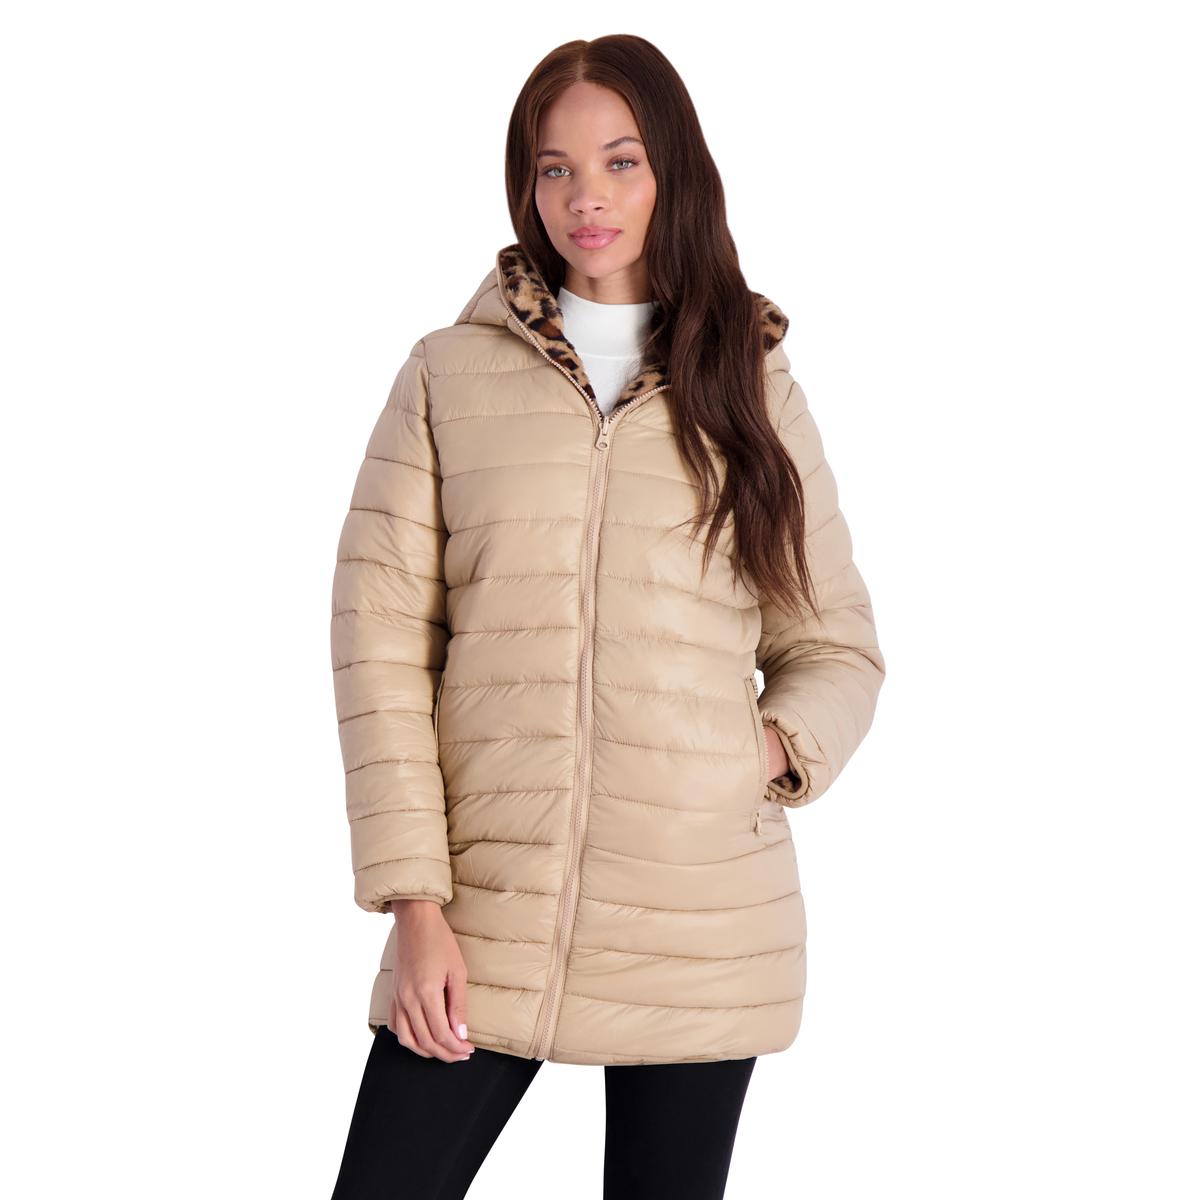 Jessica Simpson Lavender Sherpa Reversible Puffer Coat - Women, Best Price  and Reviews